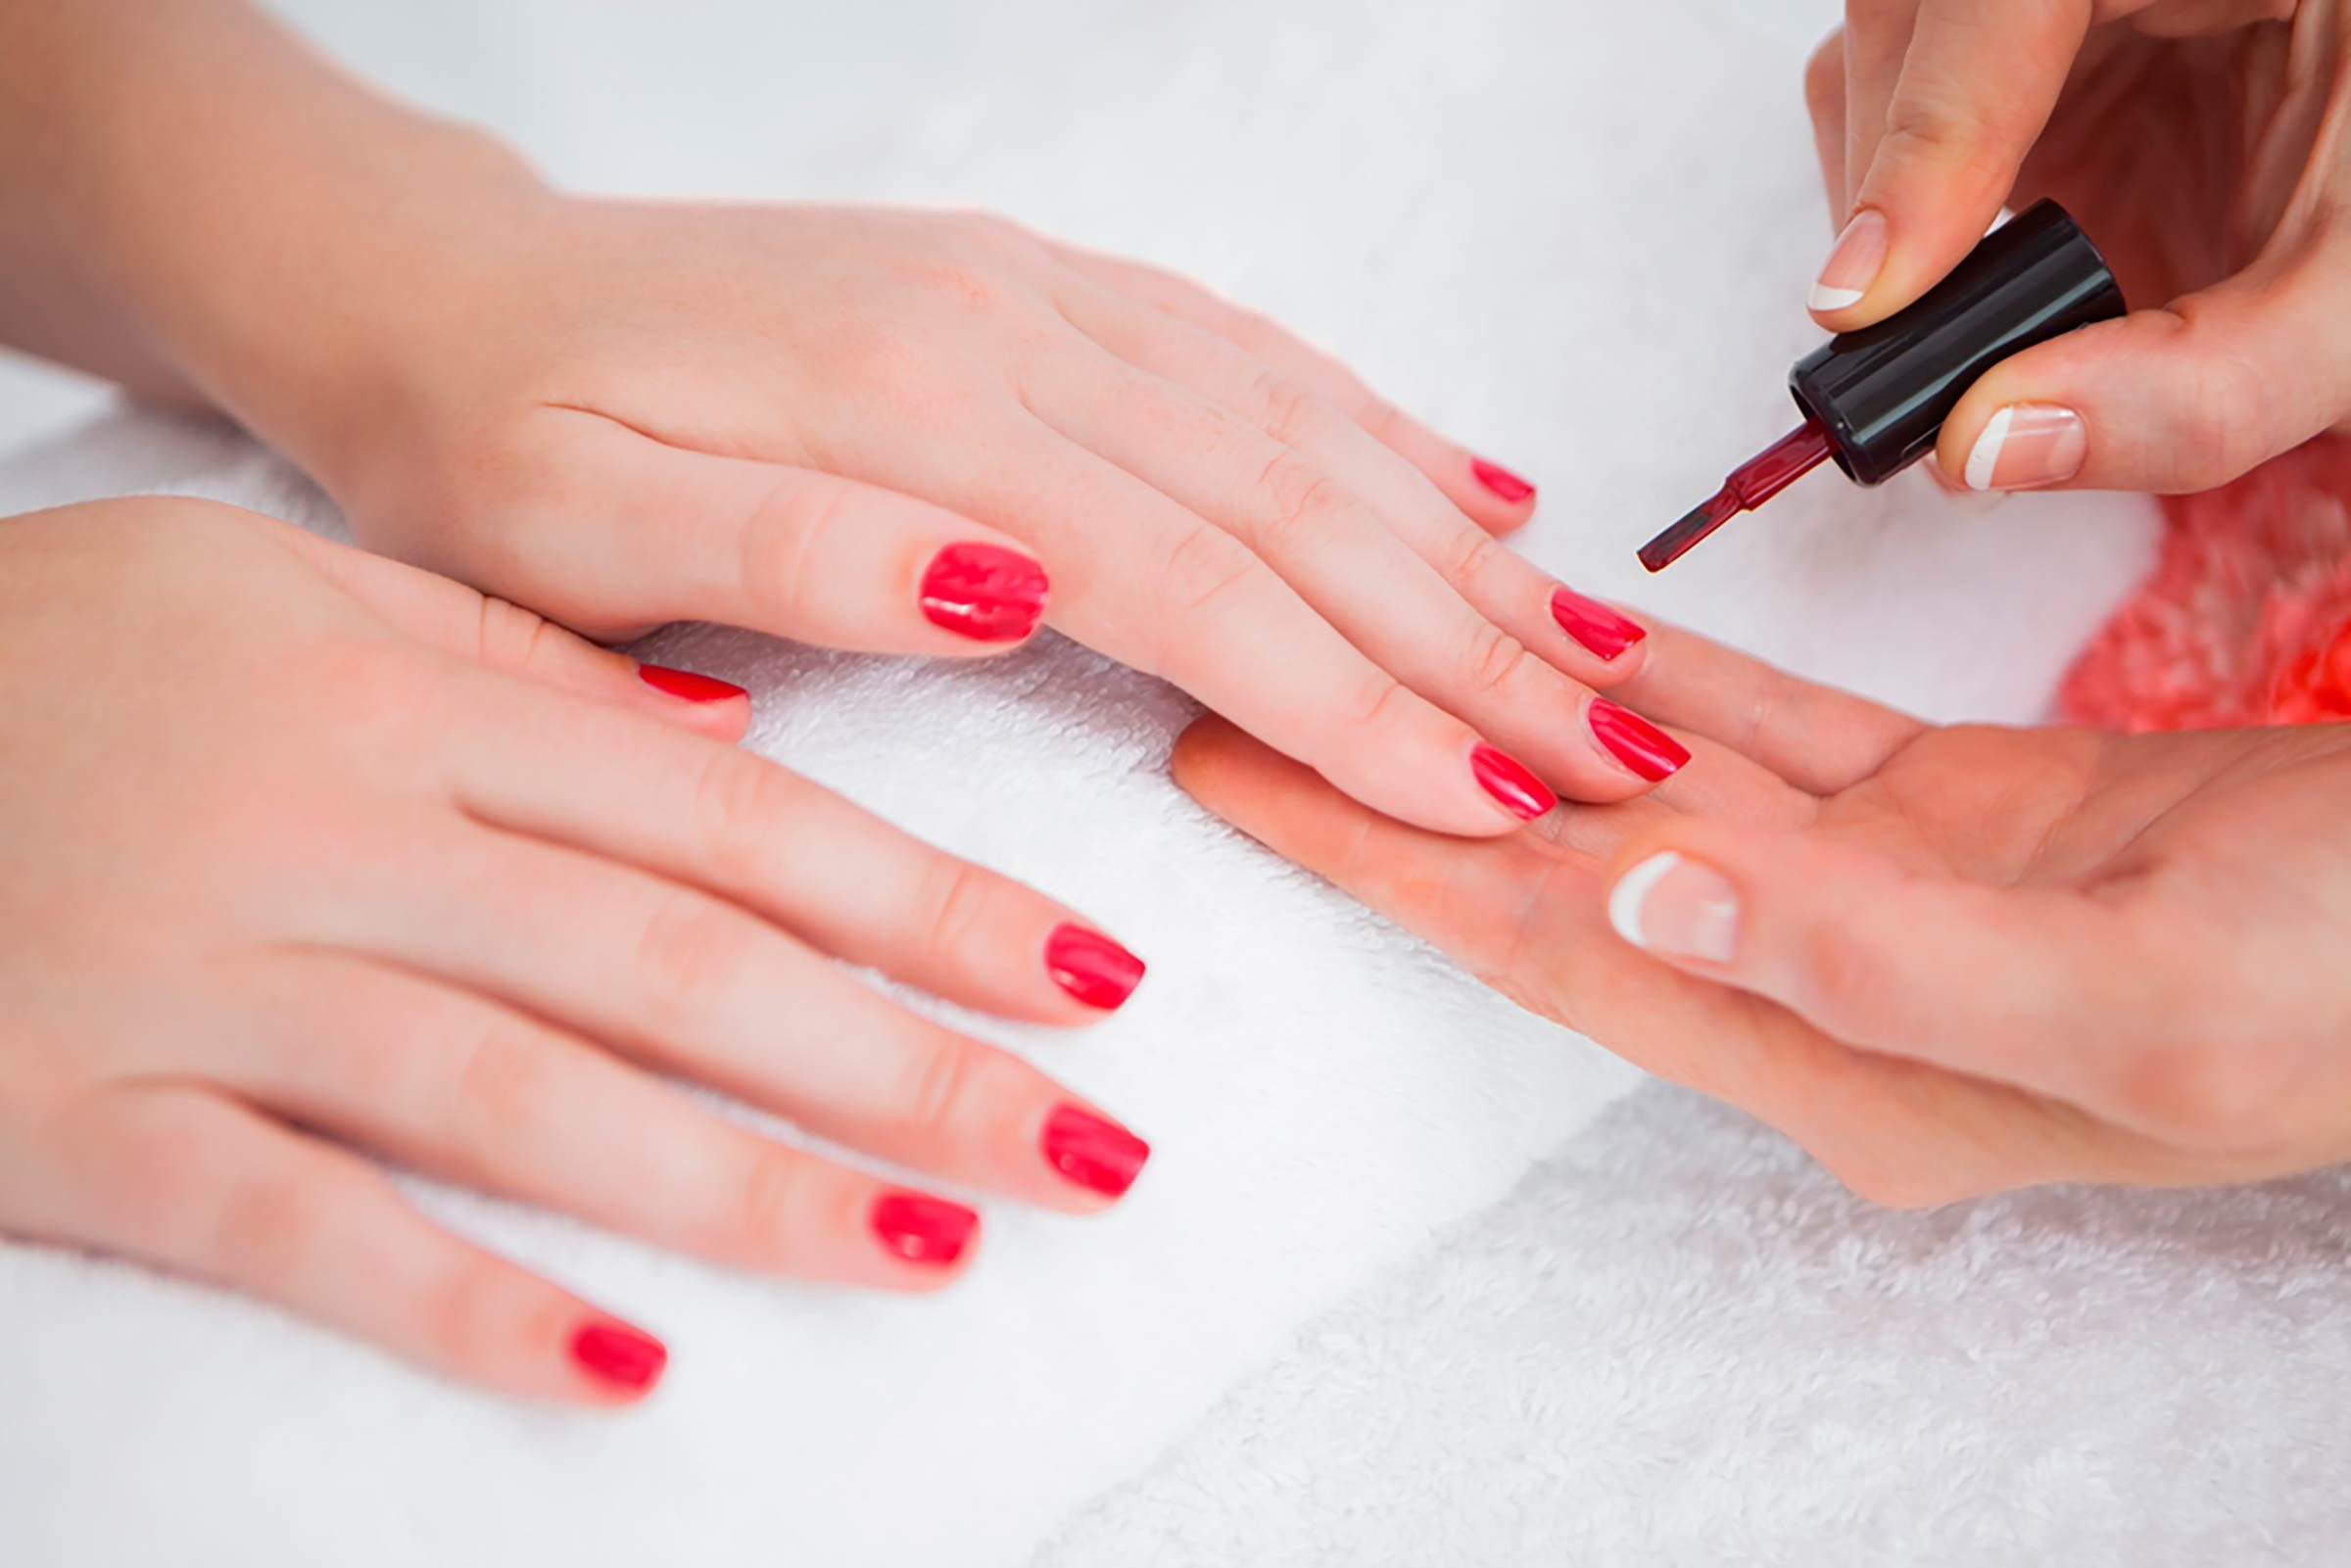 Methyl Methacrylate in Nail Salons: What You Need to Know | The Healthy